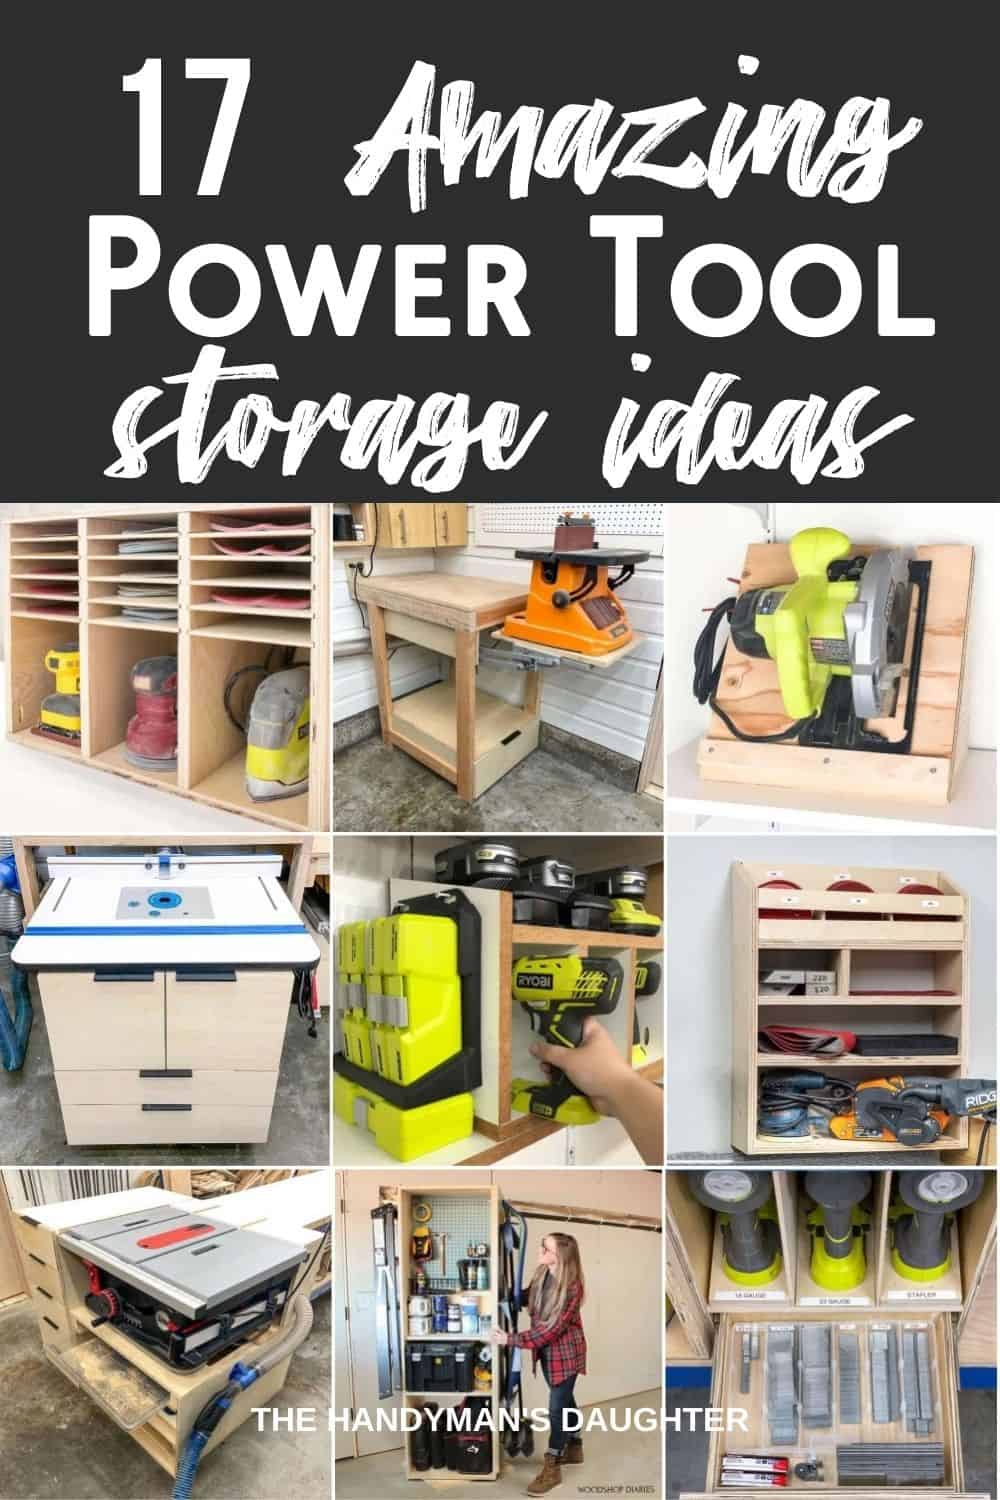 https://www.thehandymansdaughter.com/wp-content/uploads/2022/05/power-tool-storage-ideas-The-Handymans-Daughter-Pin.jpg